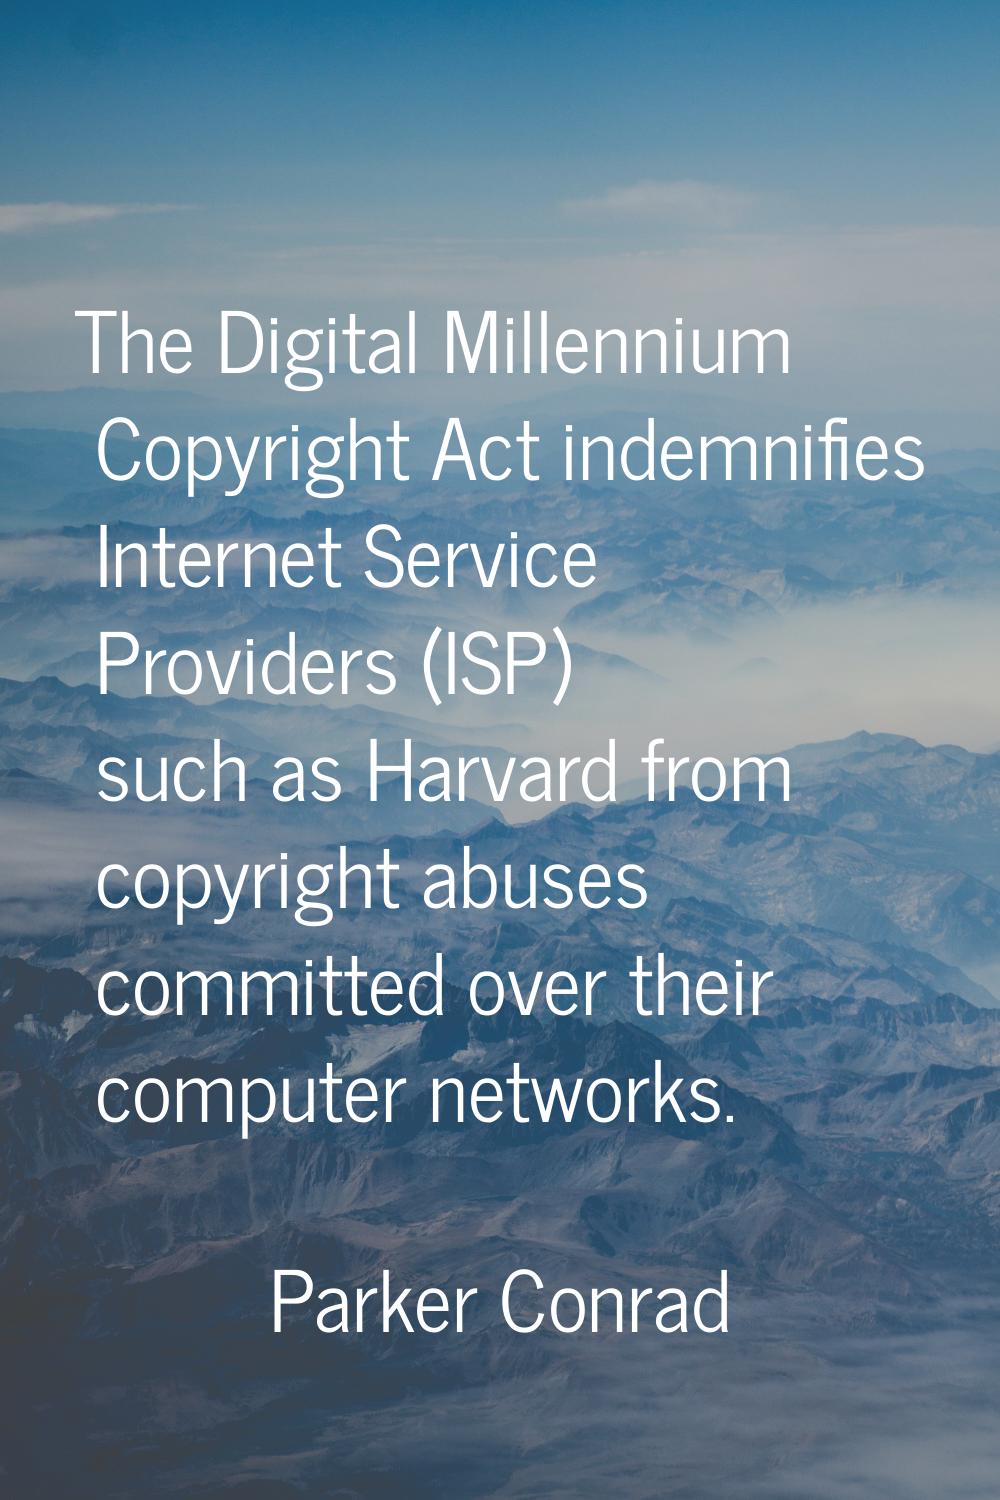 The Digital Millennium Copyright Act indemnifies Internet Service Providers (ISP) such as Harvard f